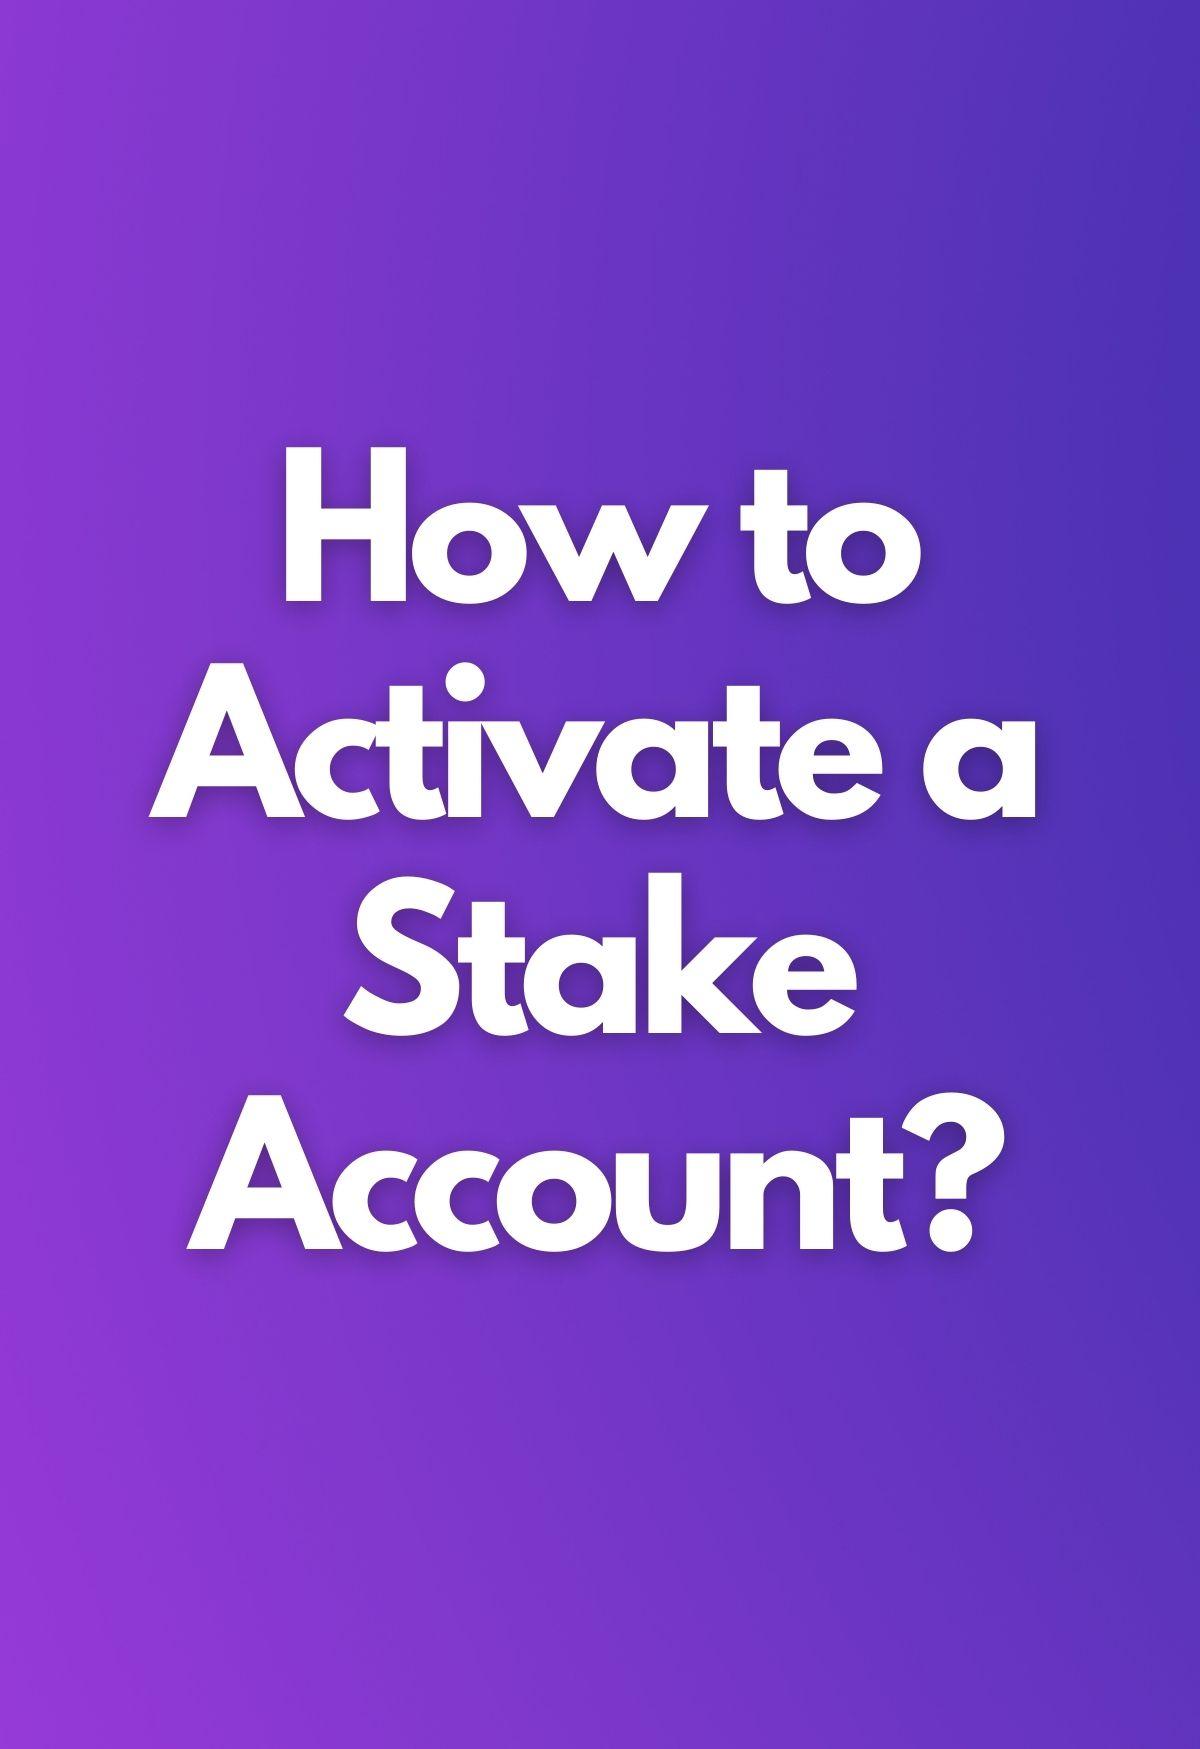 How to Activate a Stake Account?